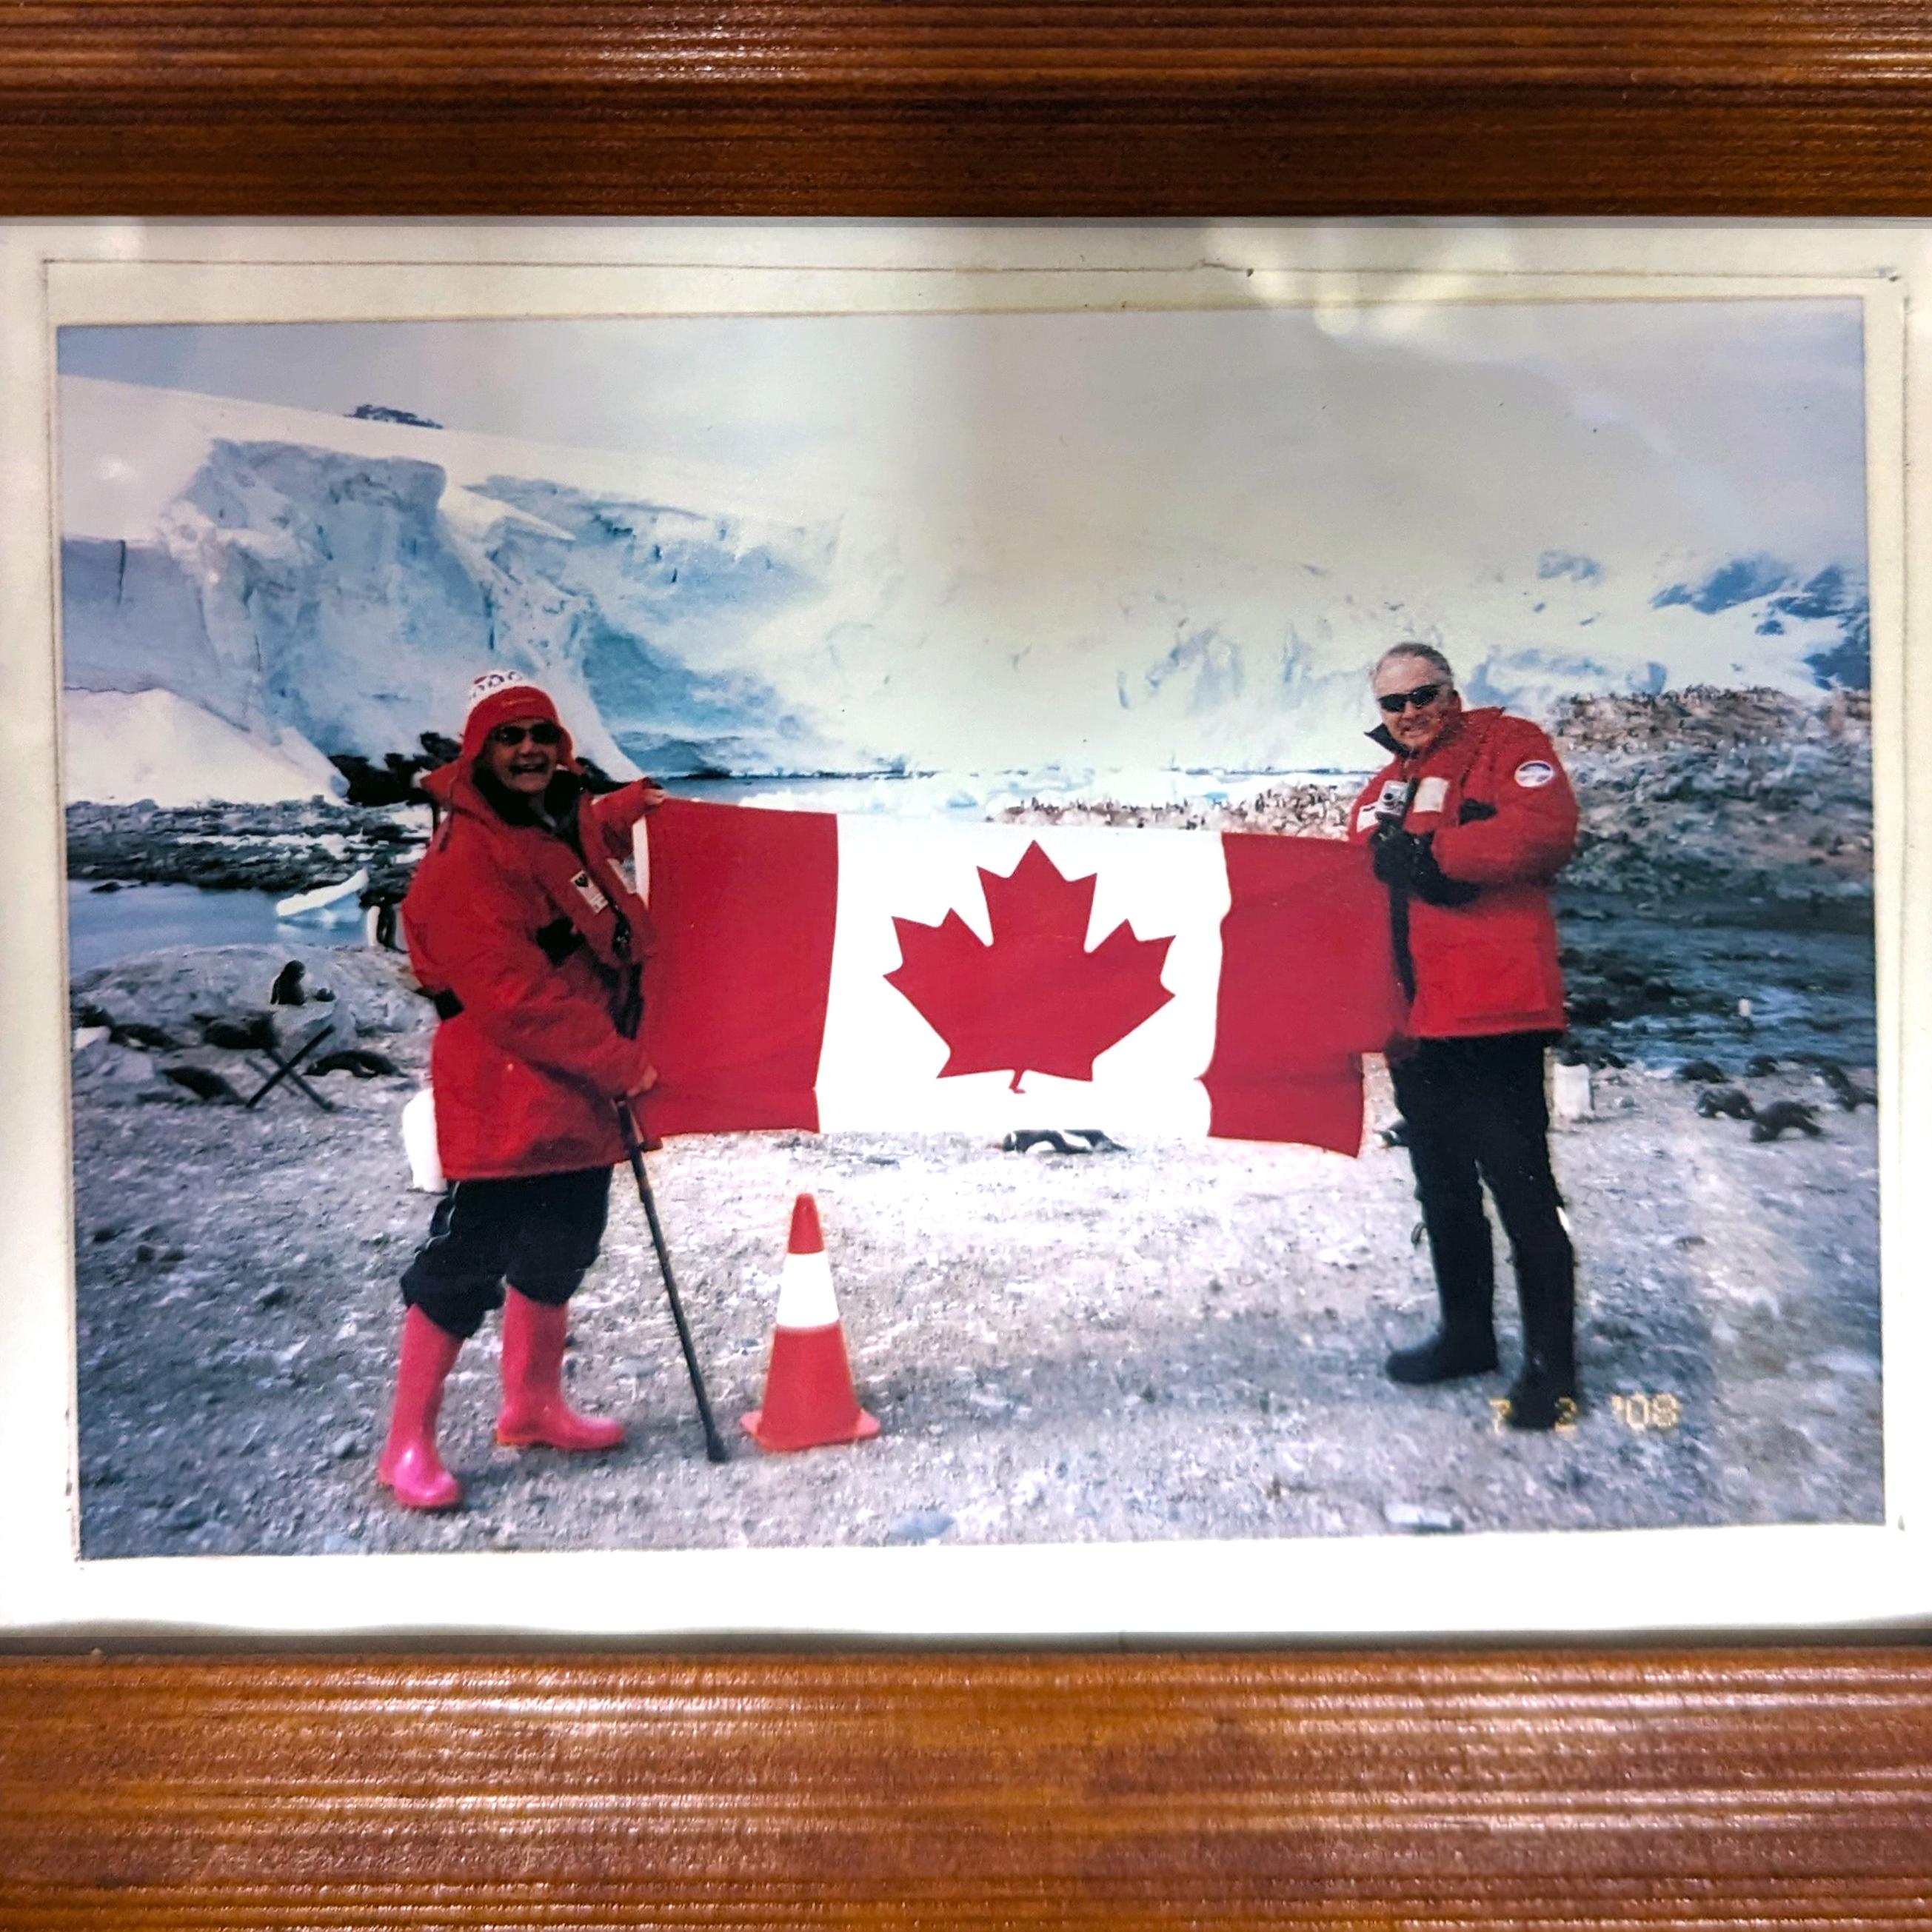 Janet with a friend holding a canadian flag in Antarctica